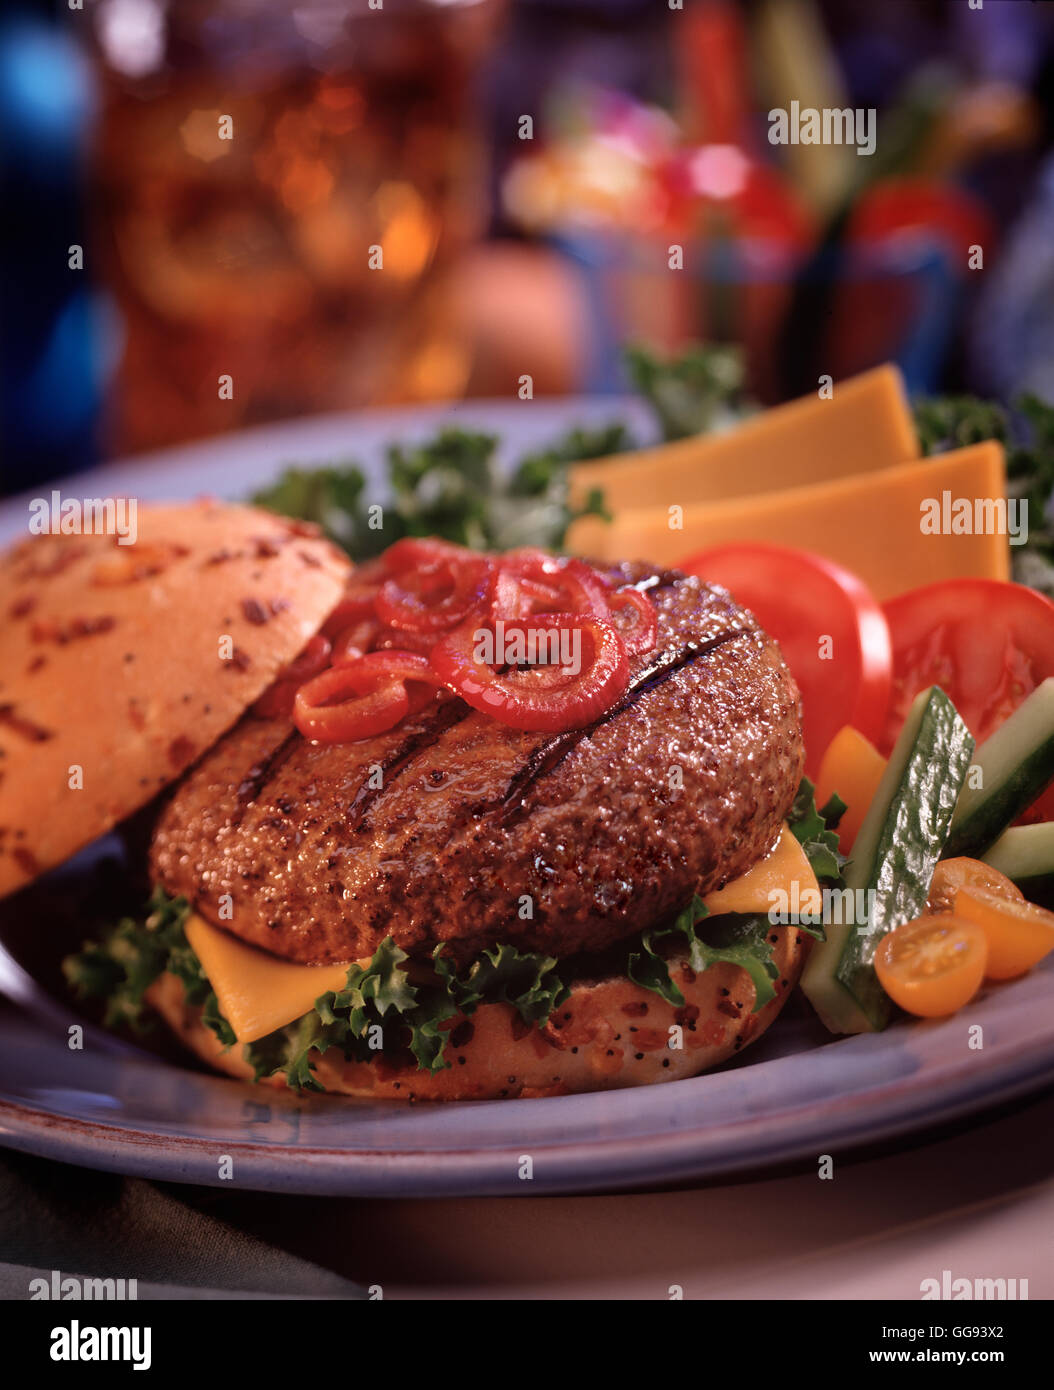 Summer Hamburger with sides toppped with grilled onions. Stock Photo